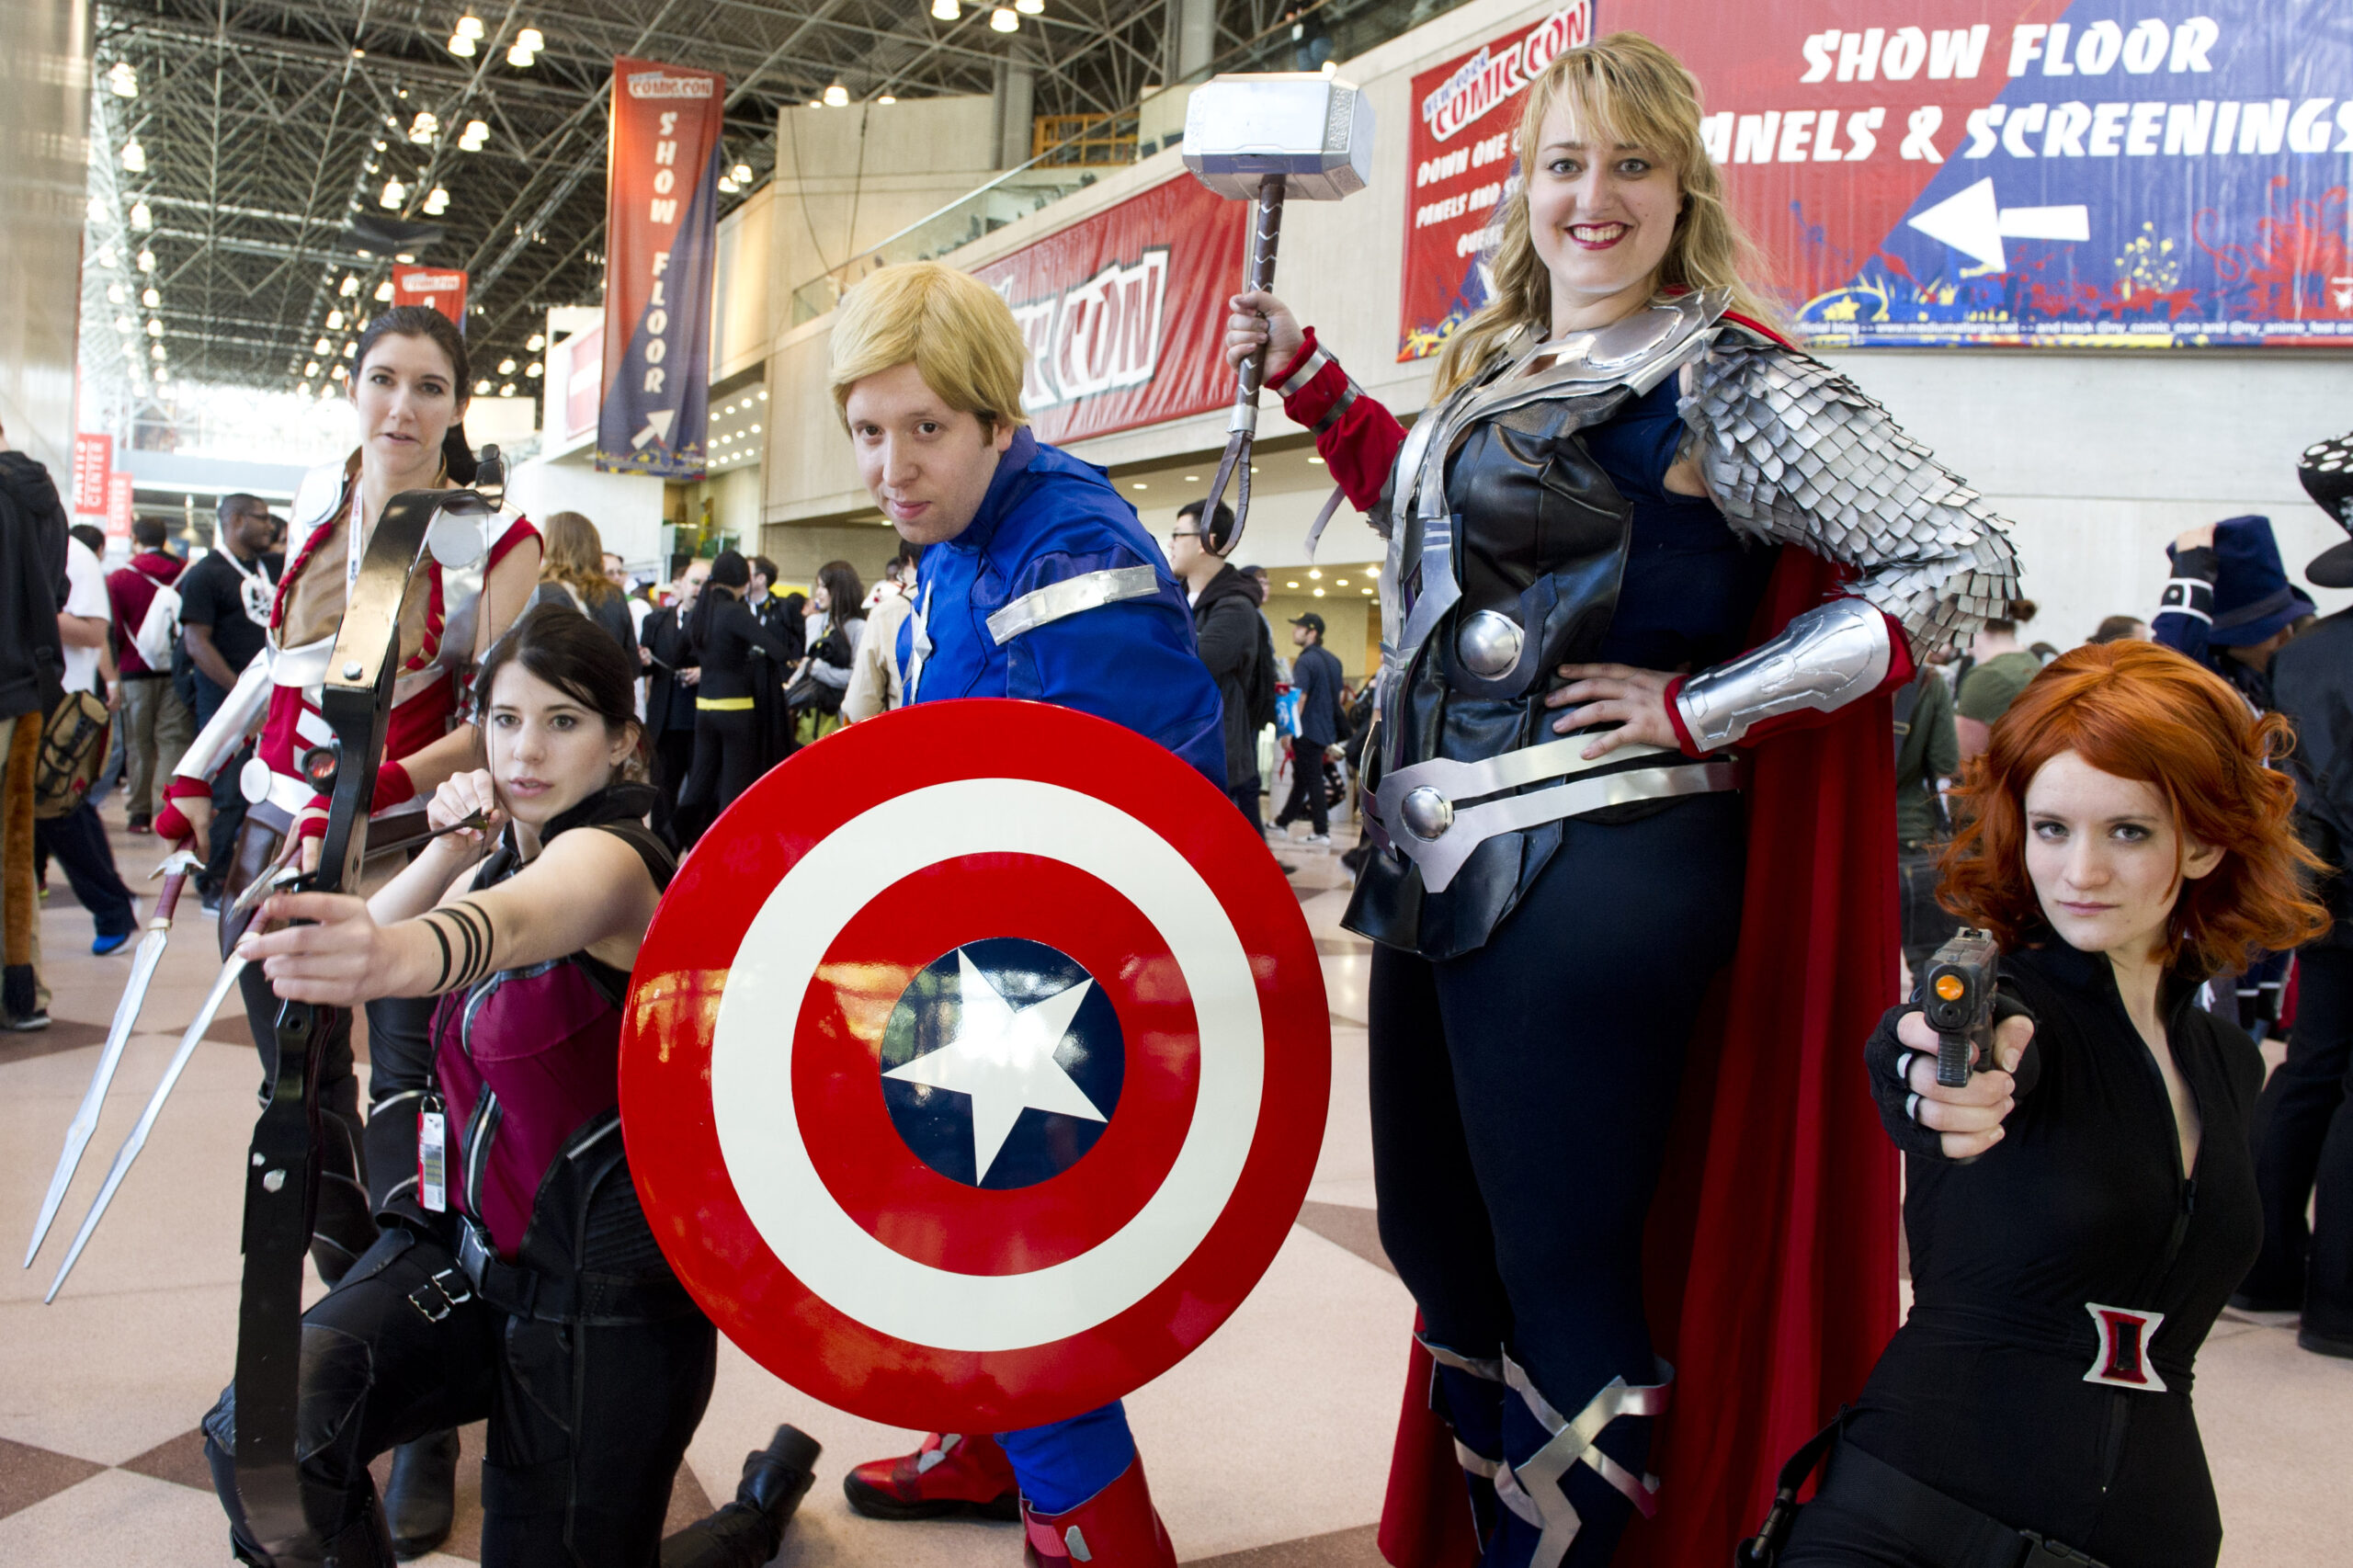 Male and female fans dressed as superheroes and comic book characters at Comic Con